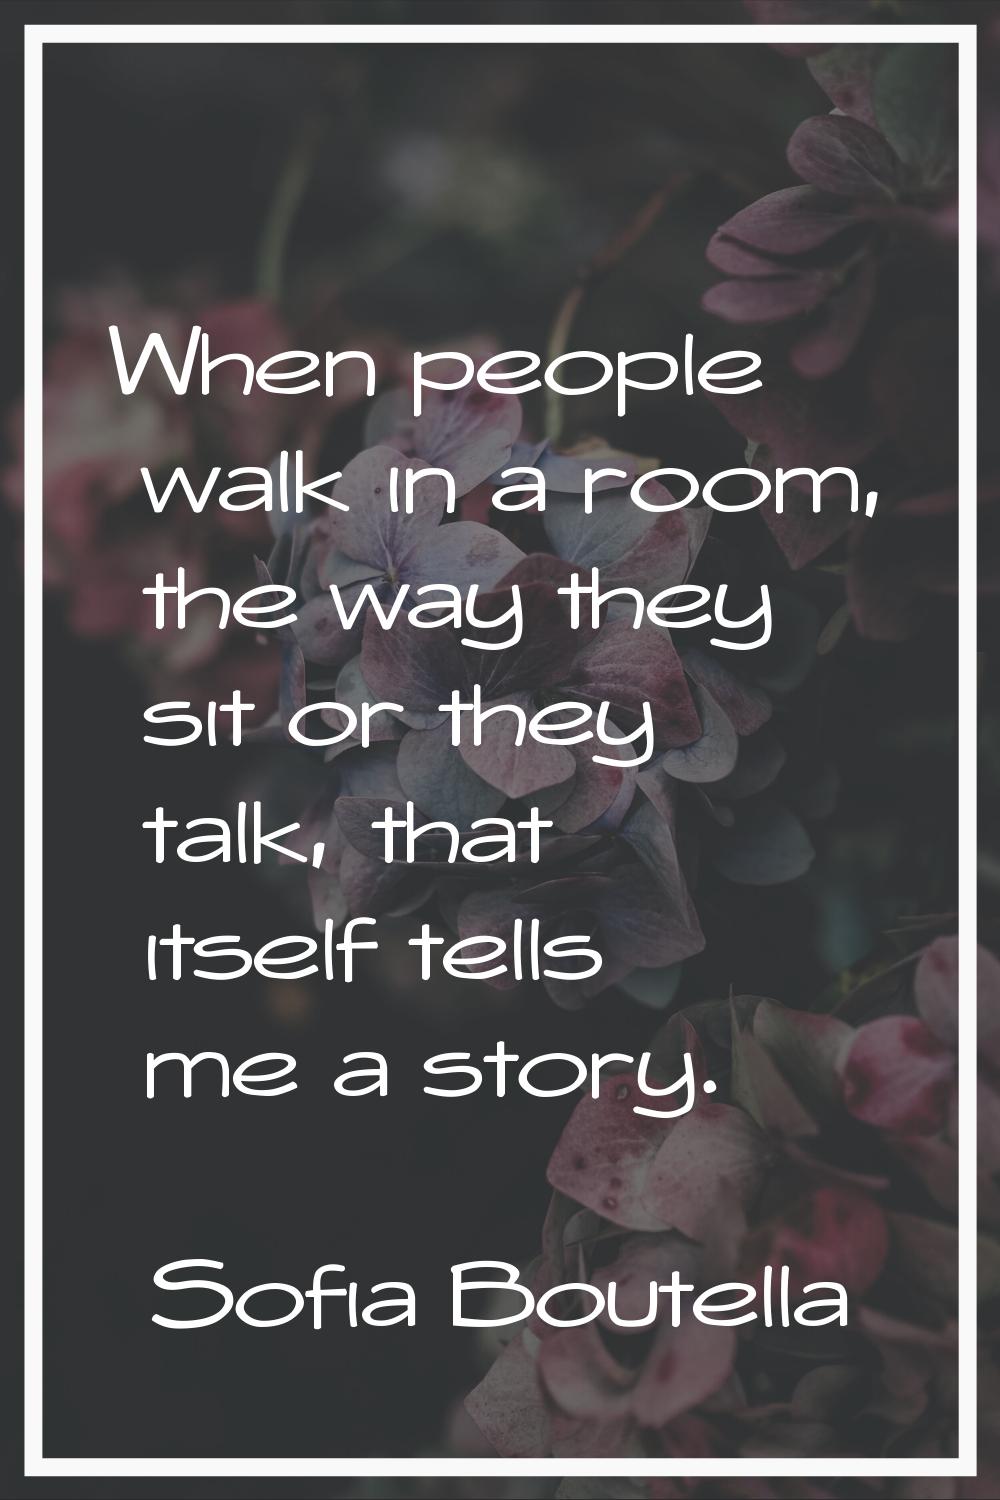 When people walk in a room, the way they sit or they talk, that itself tells me a story.